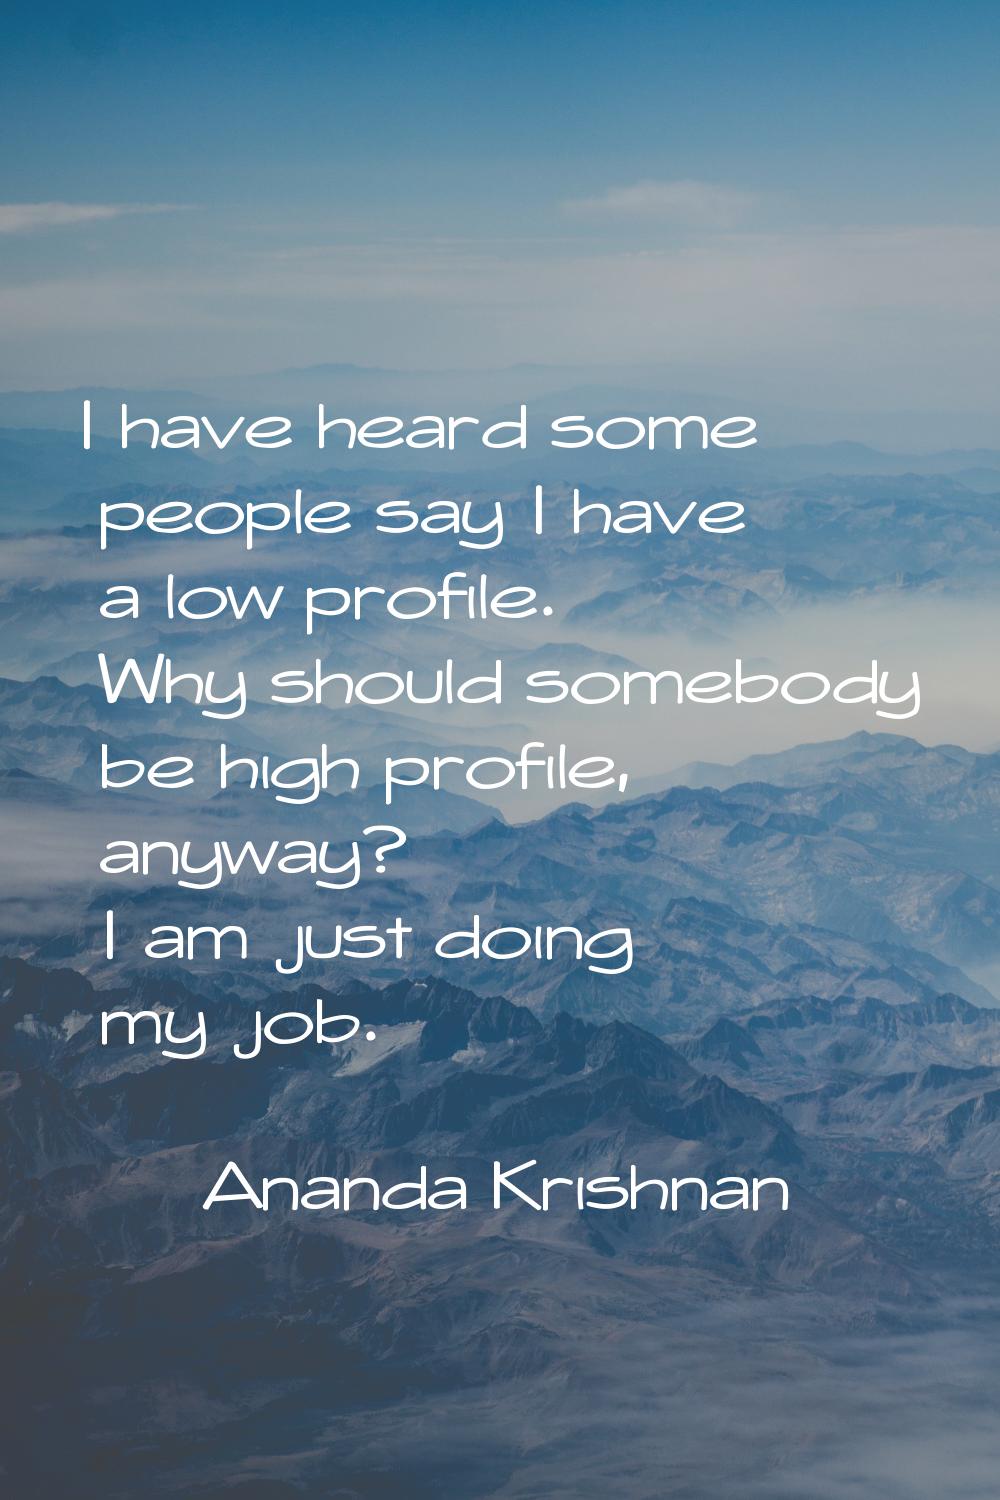 I have heard some people say I have a low profile. Why should somebody be high profile, anyway? I a